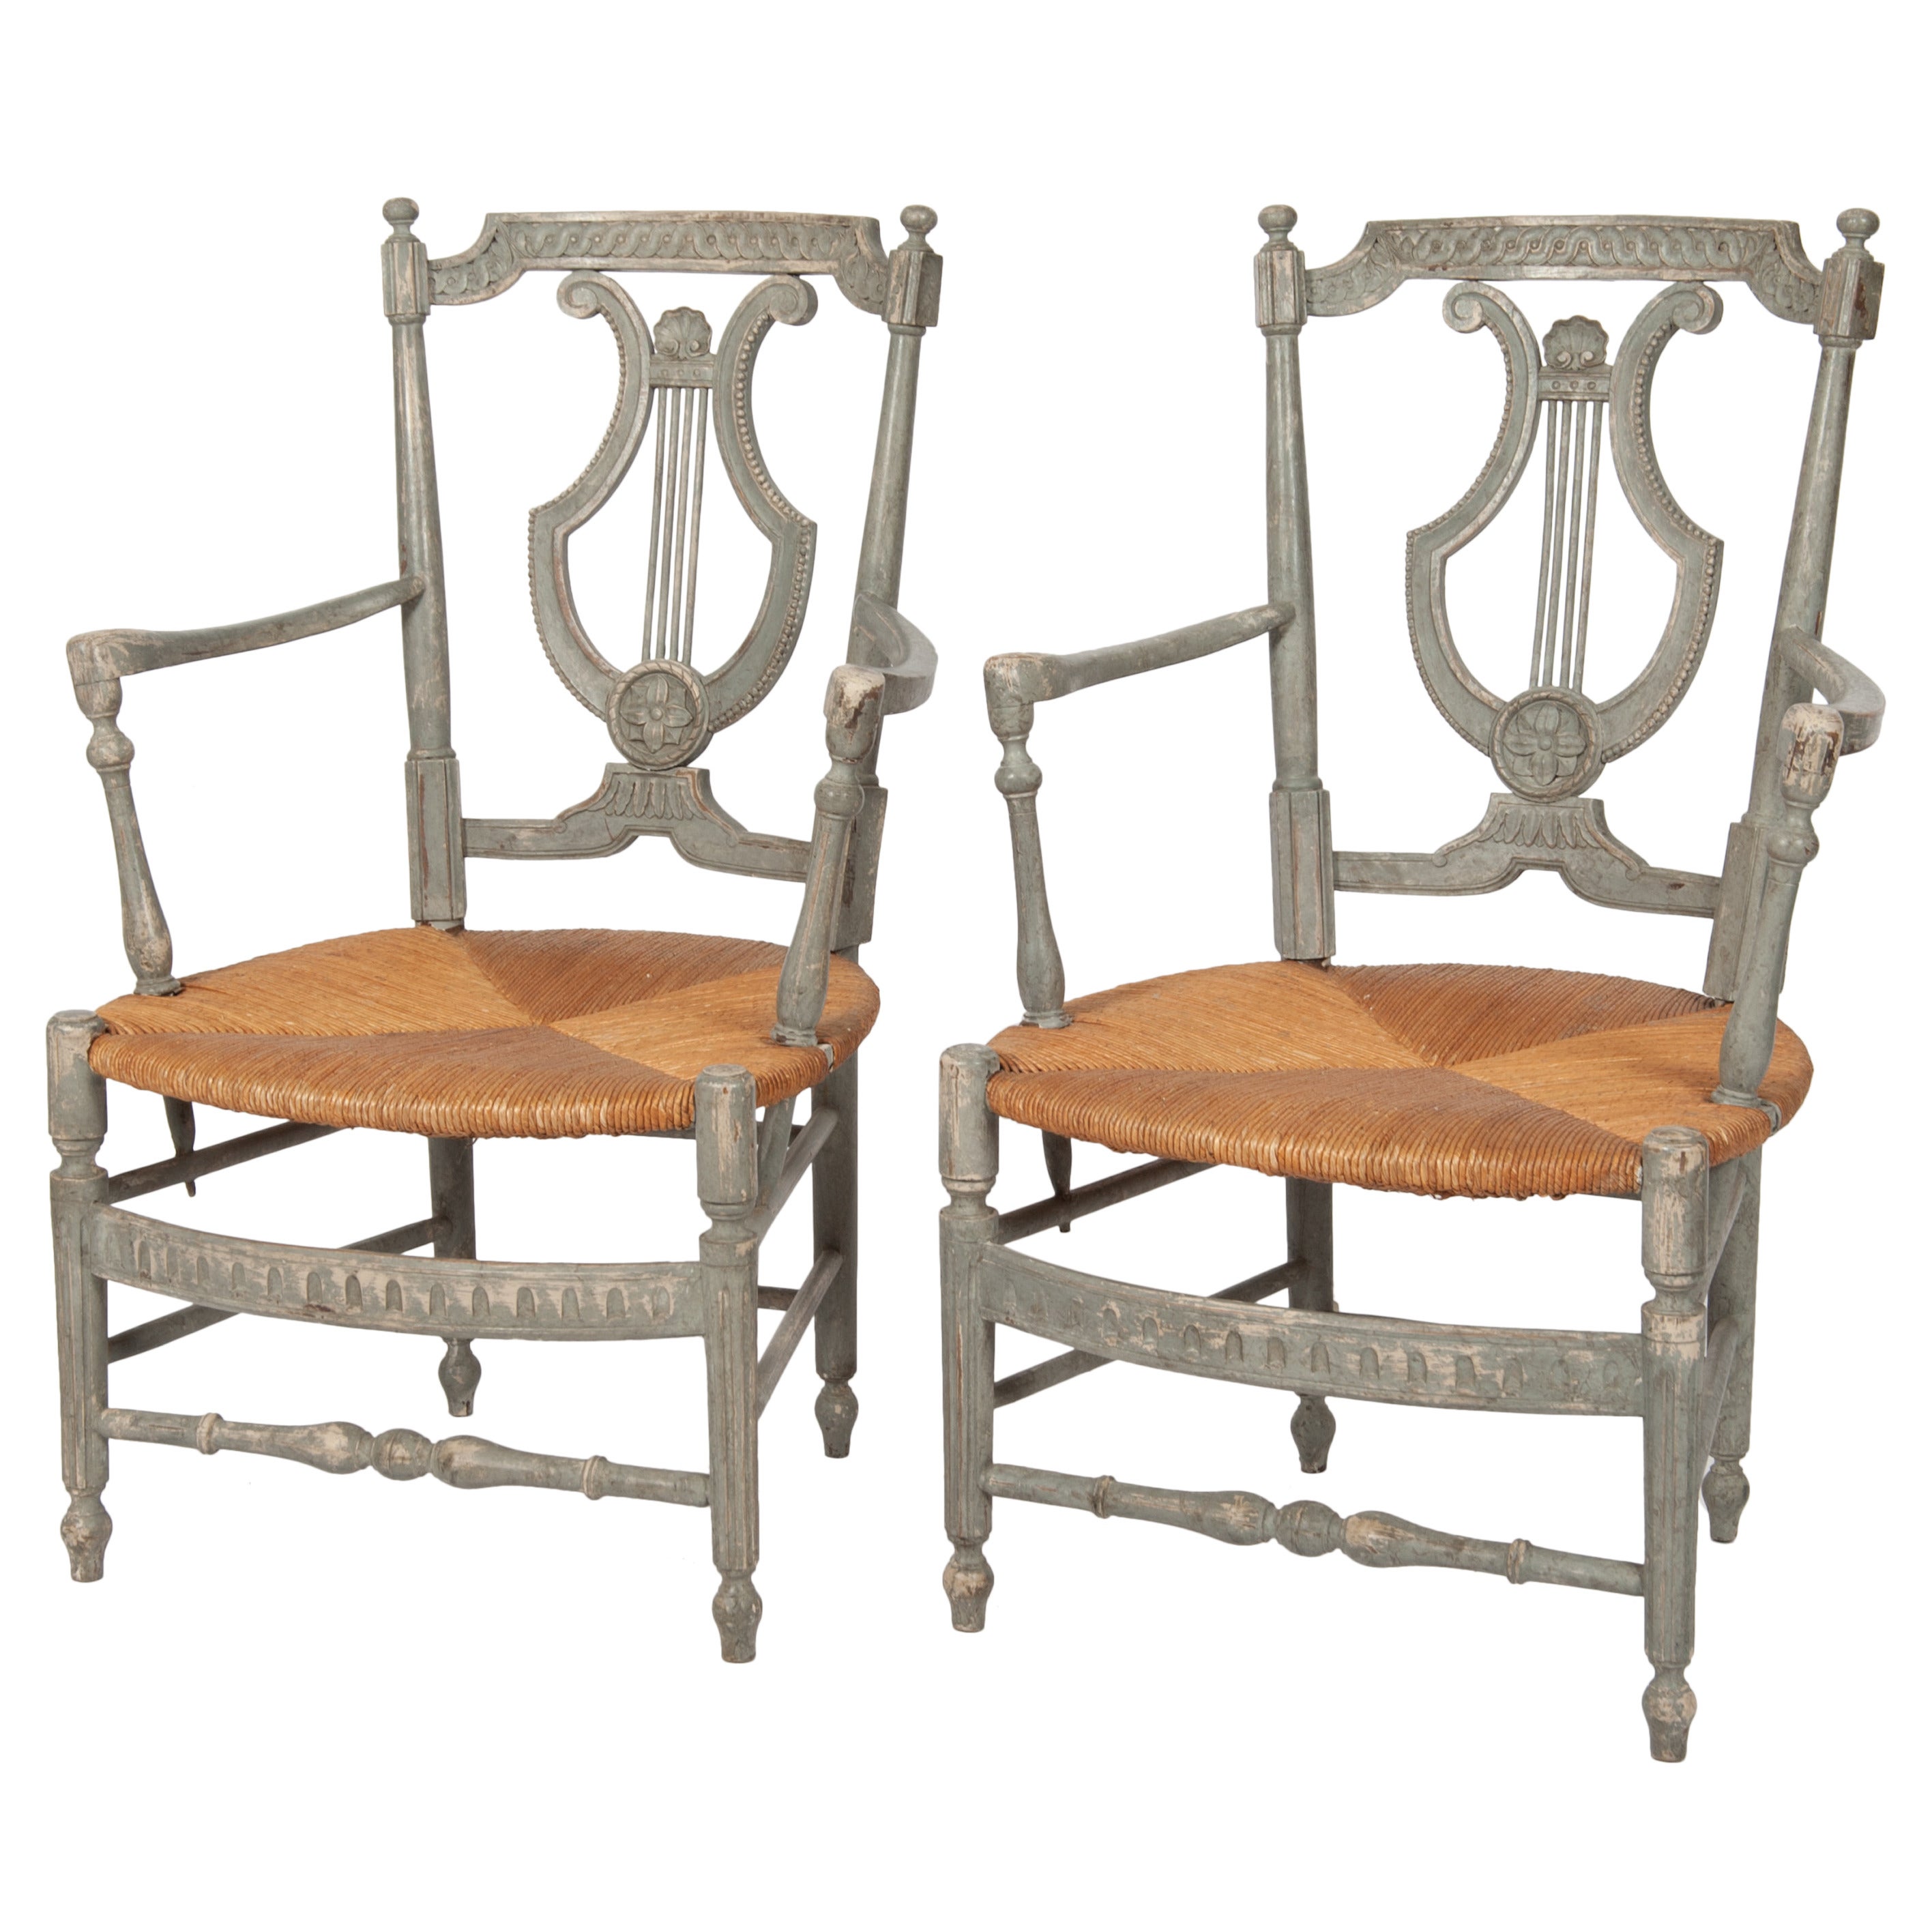 Superb Pair of French Provincial Carver Chairs, circa 1800 For Sale